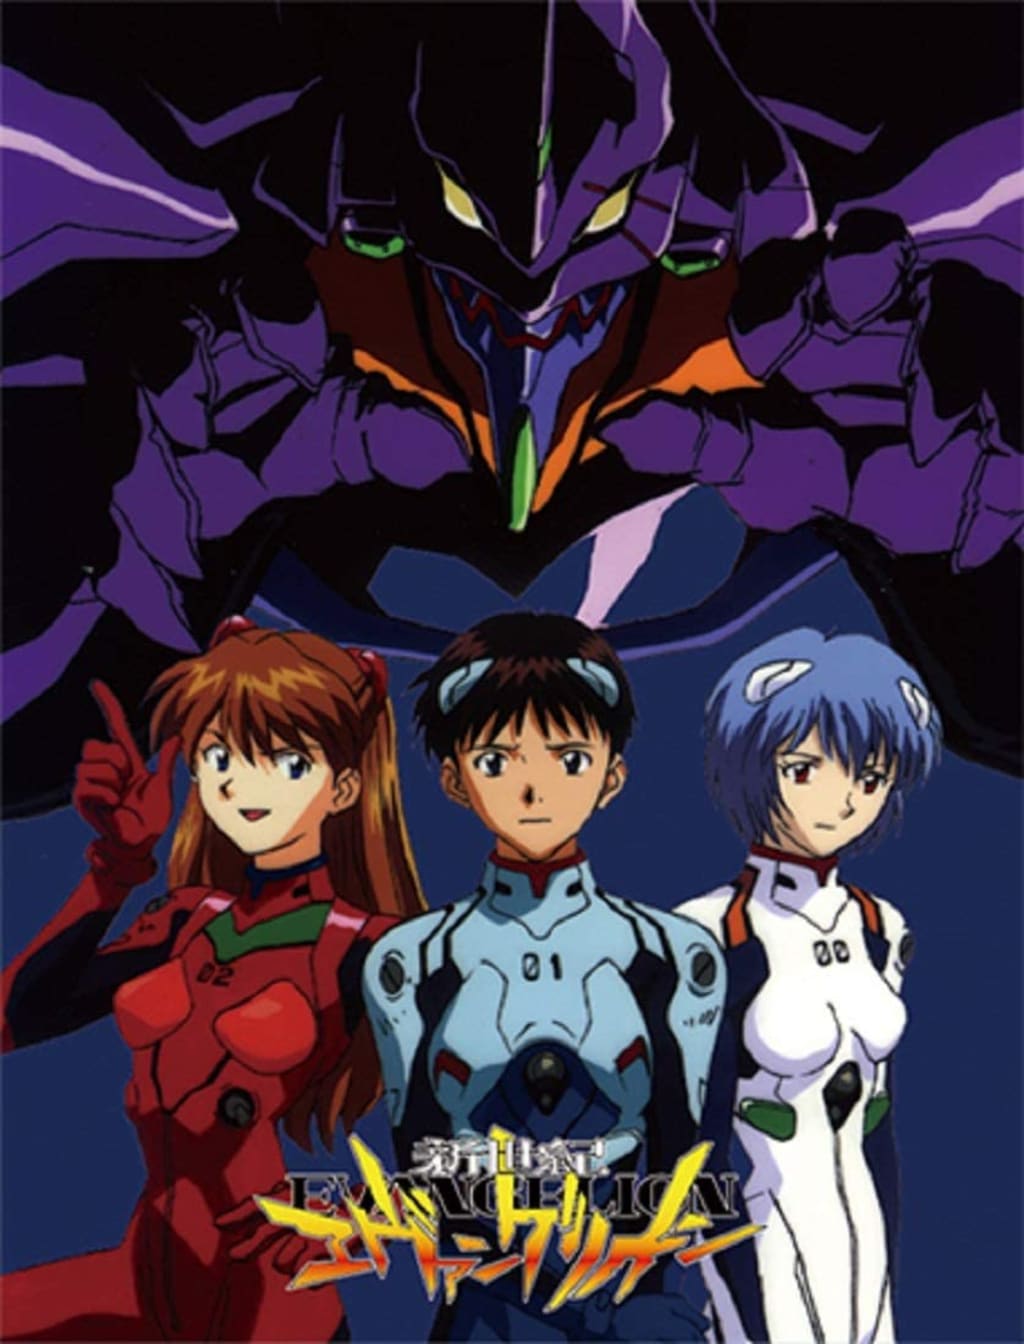 Neon Genesis Evangelion: How To Watch The Franchise In Chronological Order